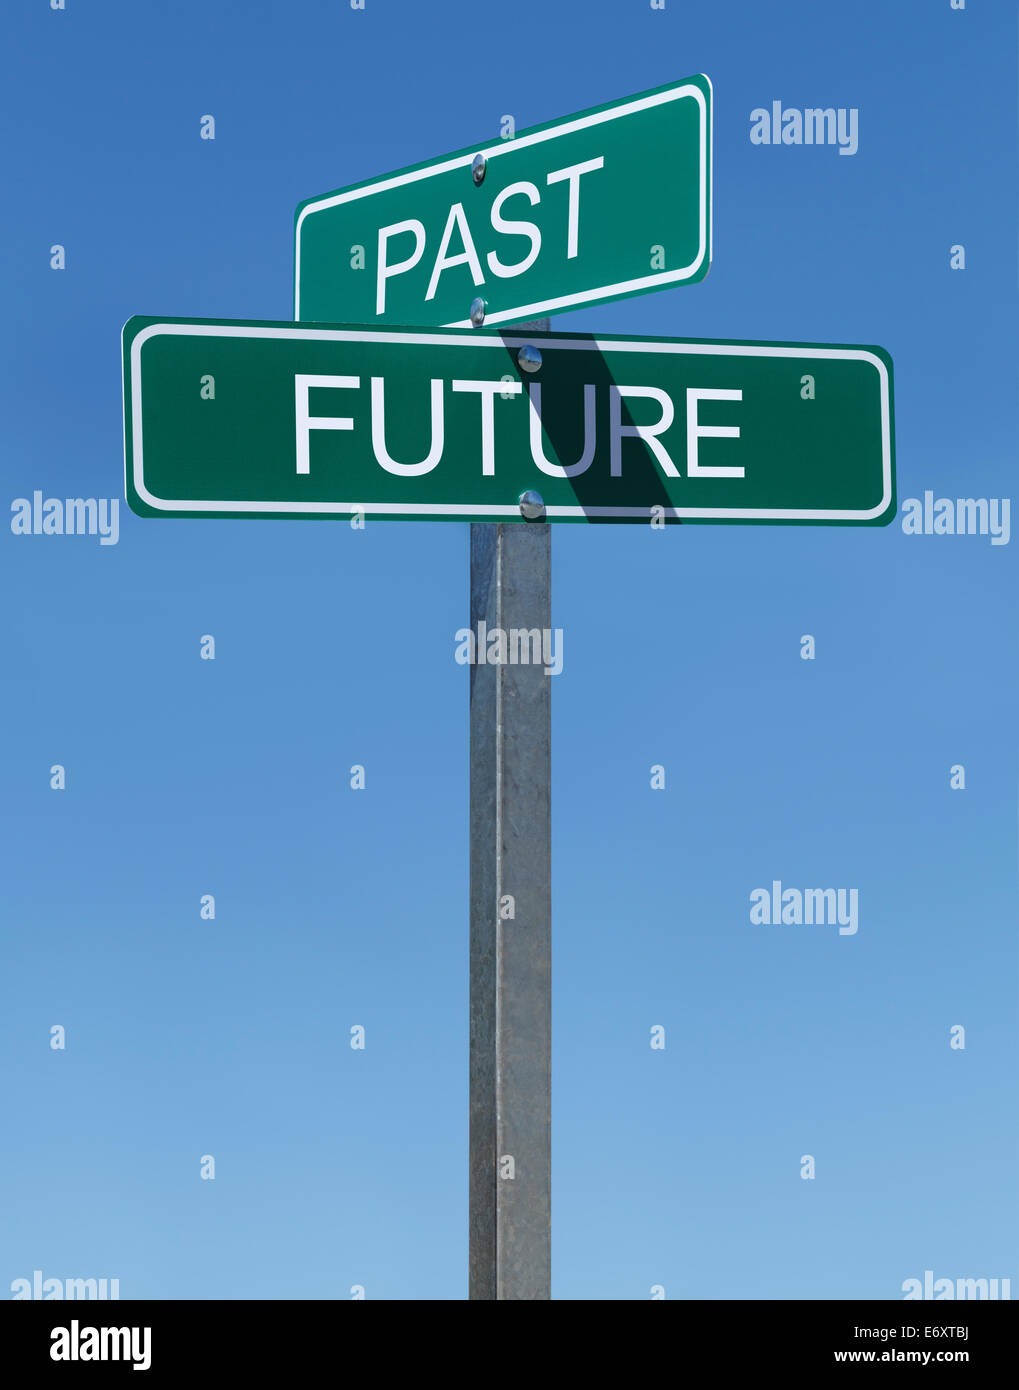 Two Green Street Signs Past and Future On Metal Pole Isolated on White Background. Stock Photo